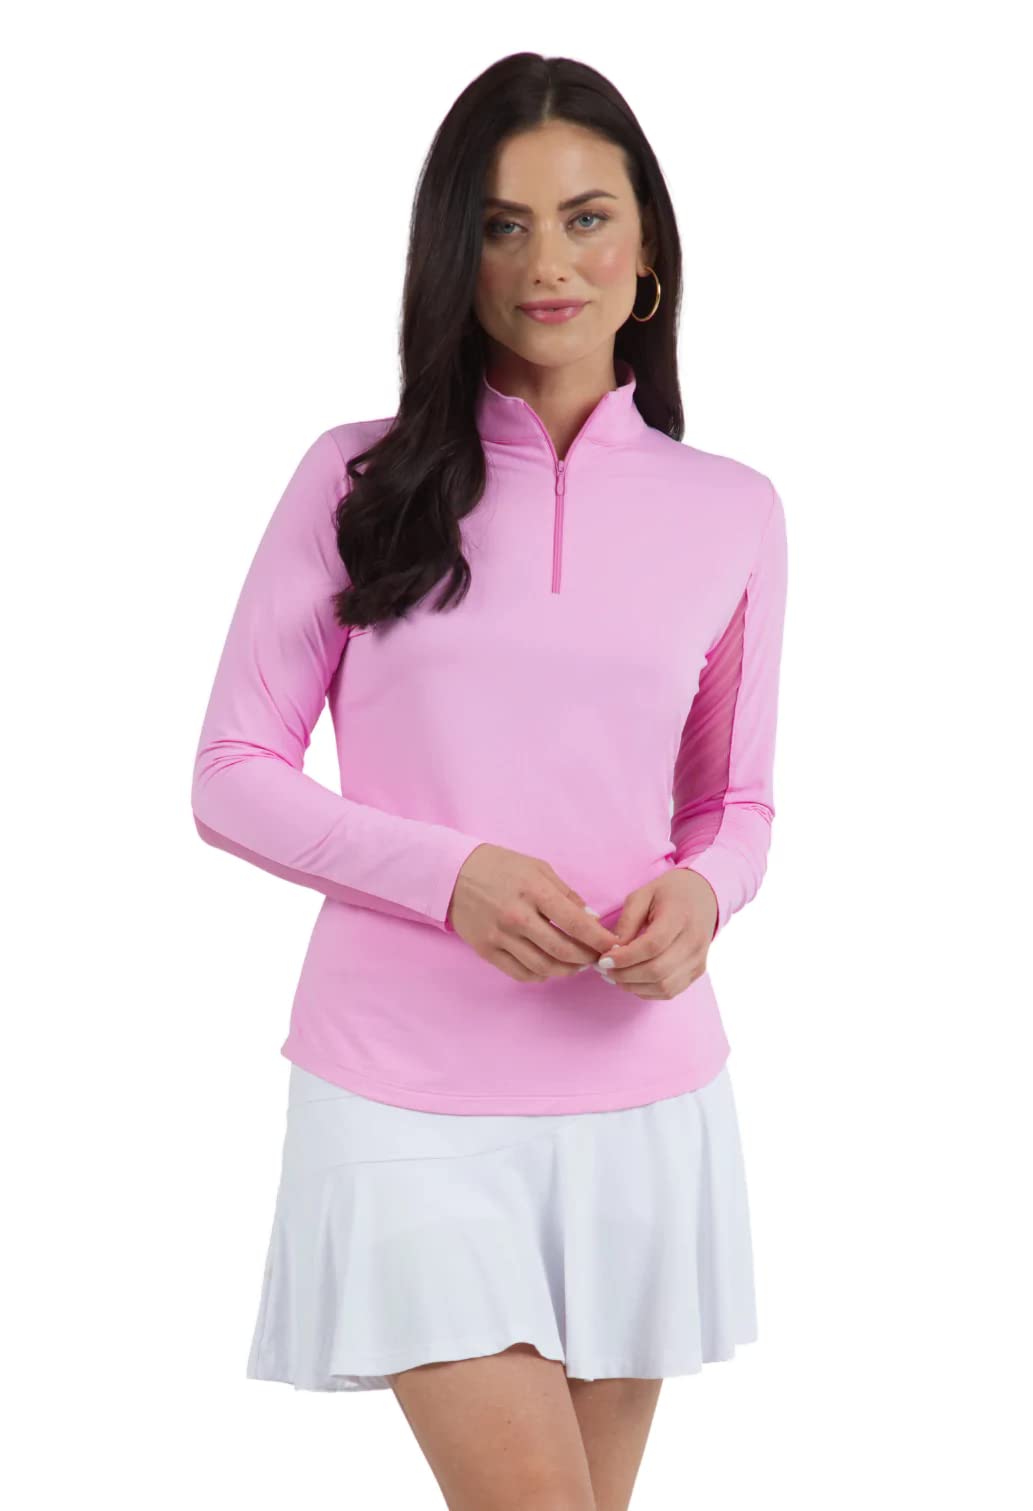 IBKUL Athleisure Wear Sun Protective UPF 50+ Icefil Cooling Tech Long Sleeve Mock Neck Top with Under Arm Mesh 80000 Watermelon Solid M